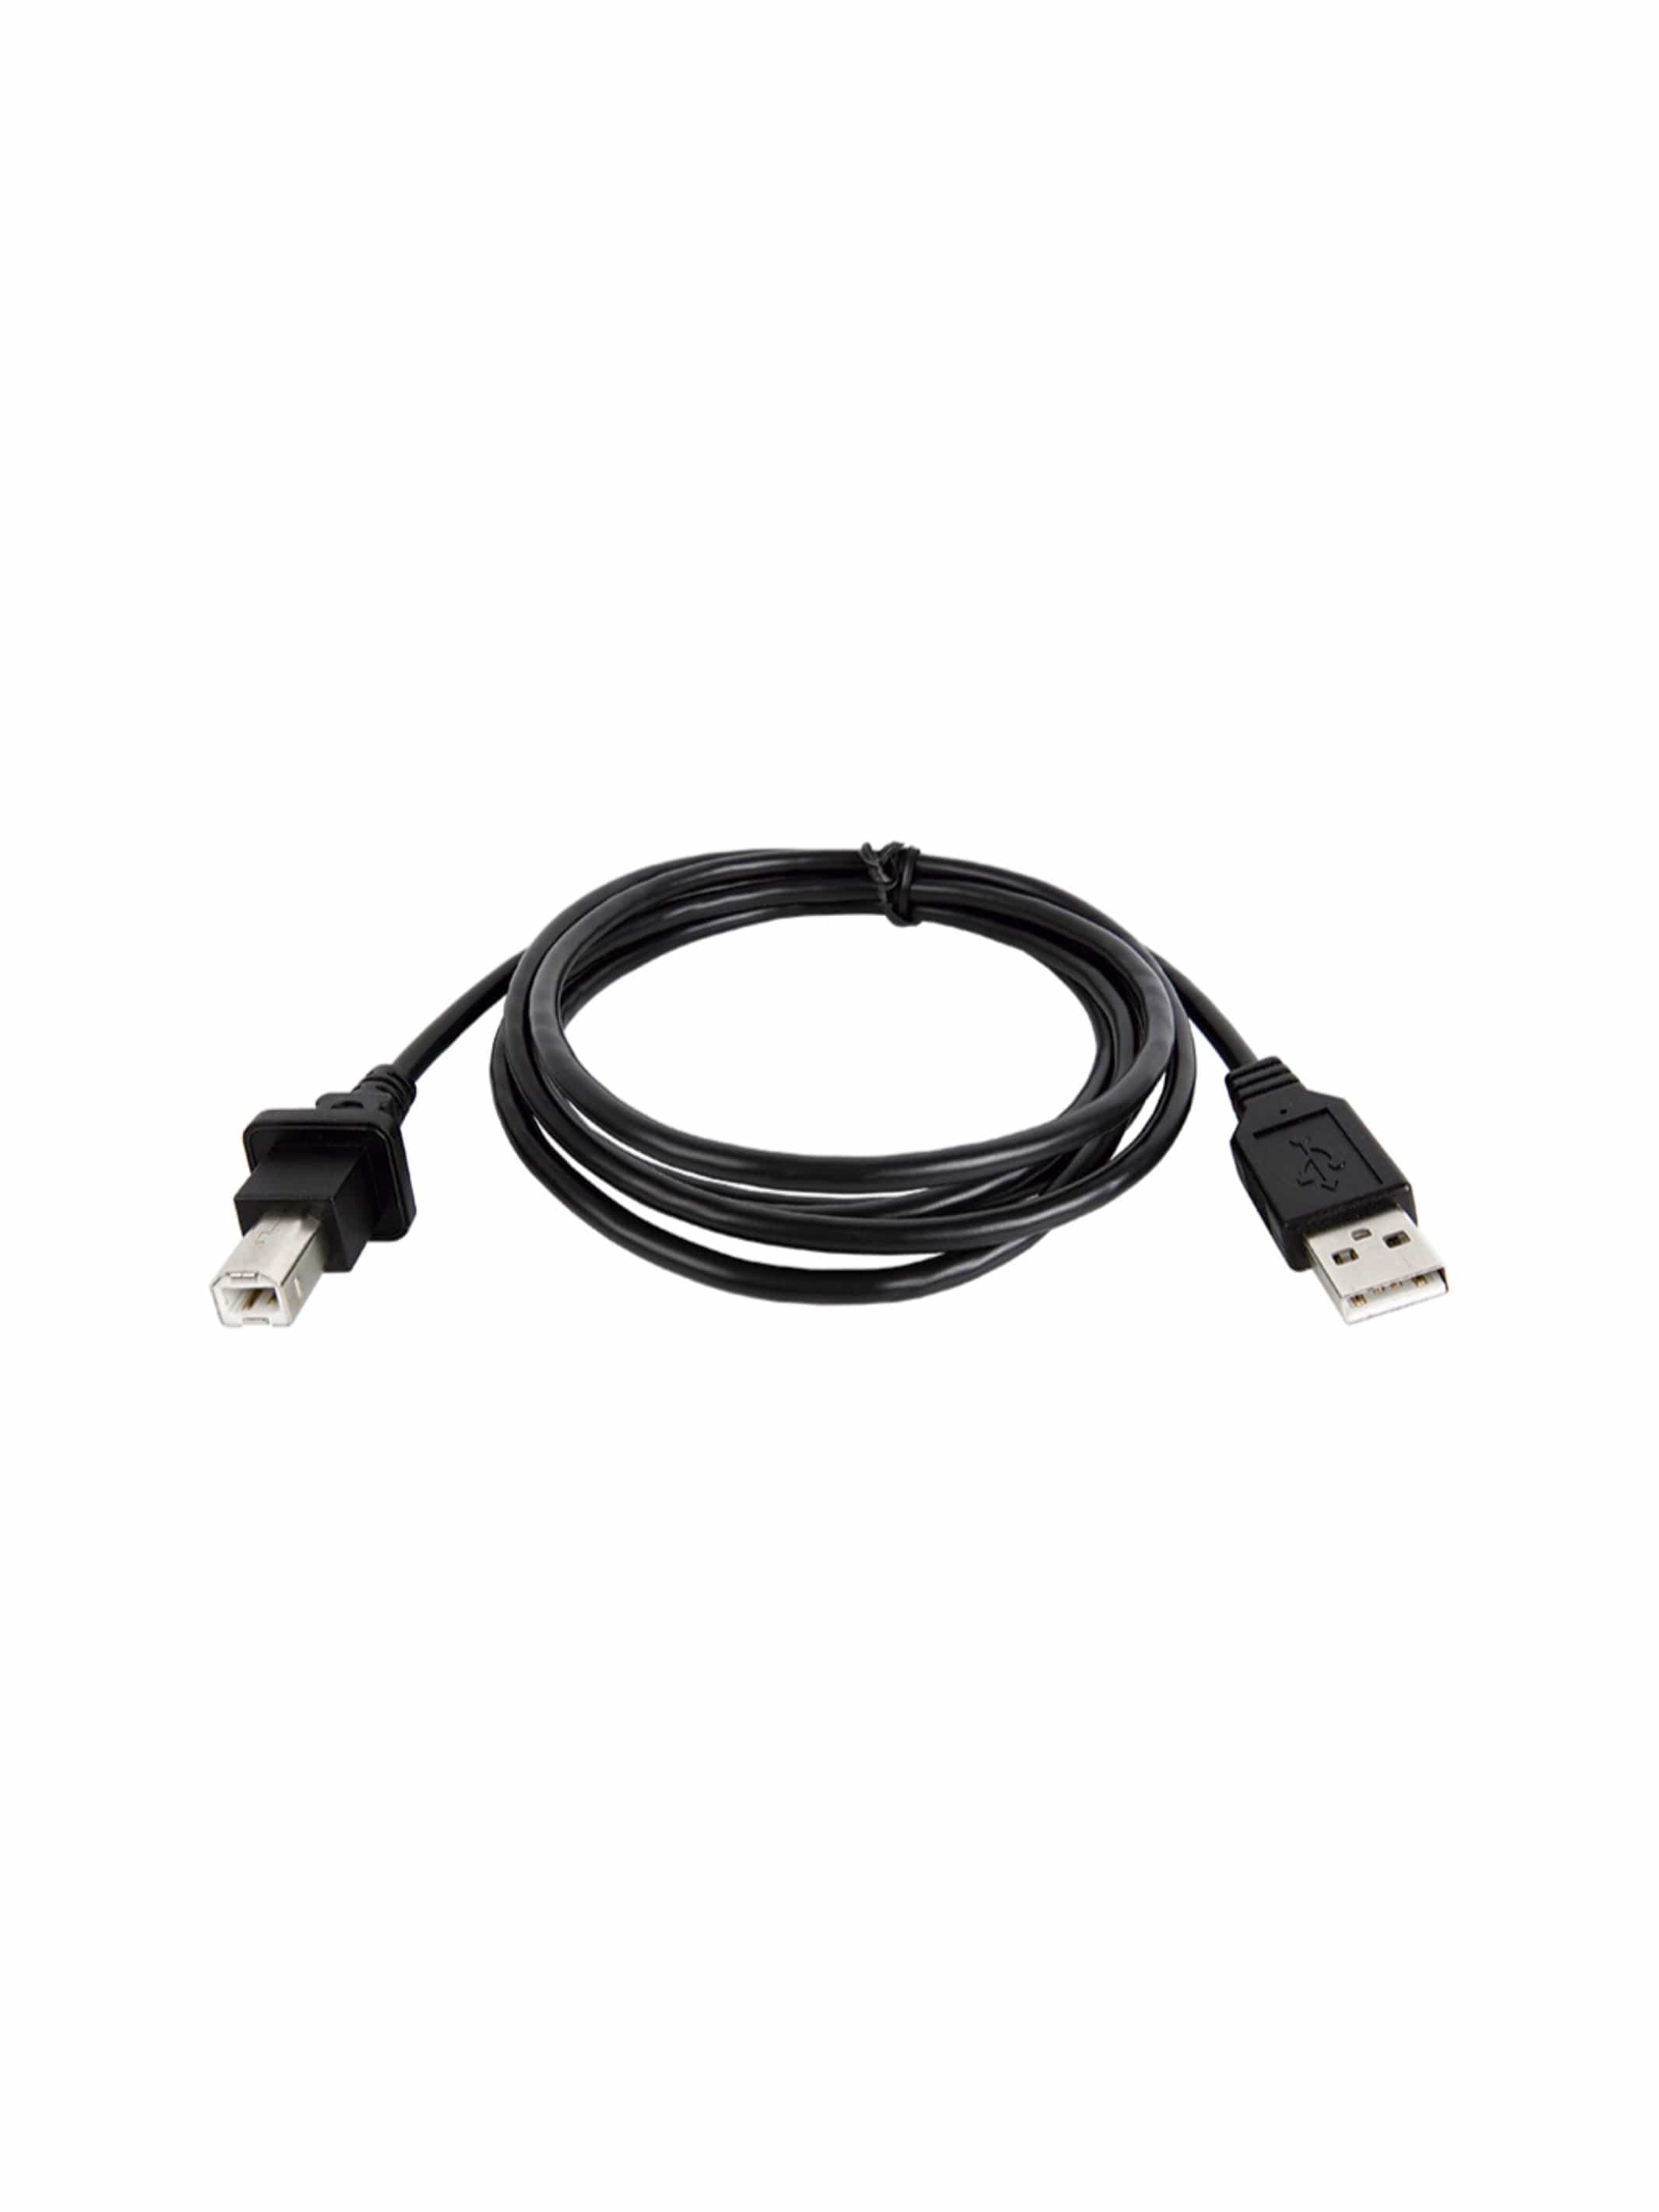 JDC107.9 USB cable - Bundle - Jaltest Deluxe Agricultural, On Highway, Commercial Vehicle & Construction, MH, Power Systems Diagnostic Kit